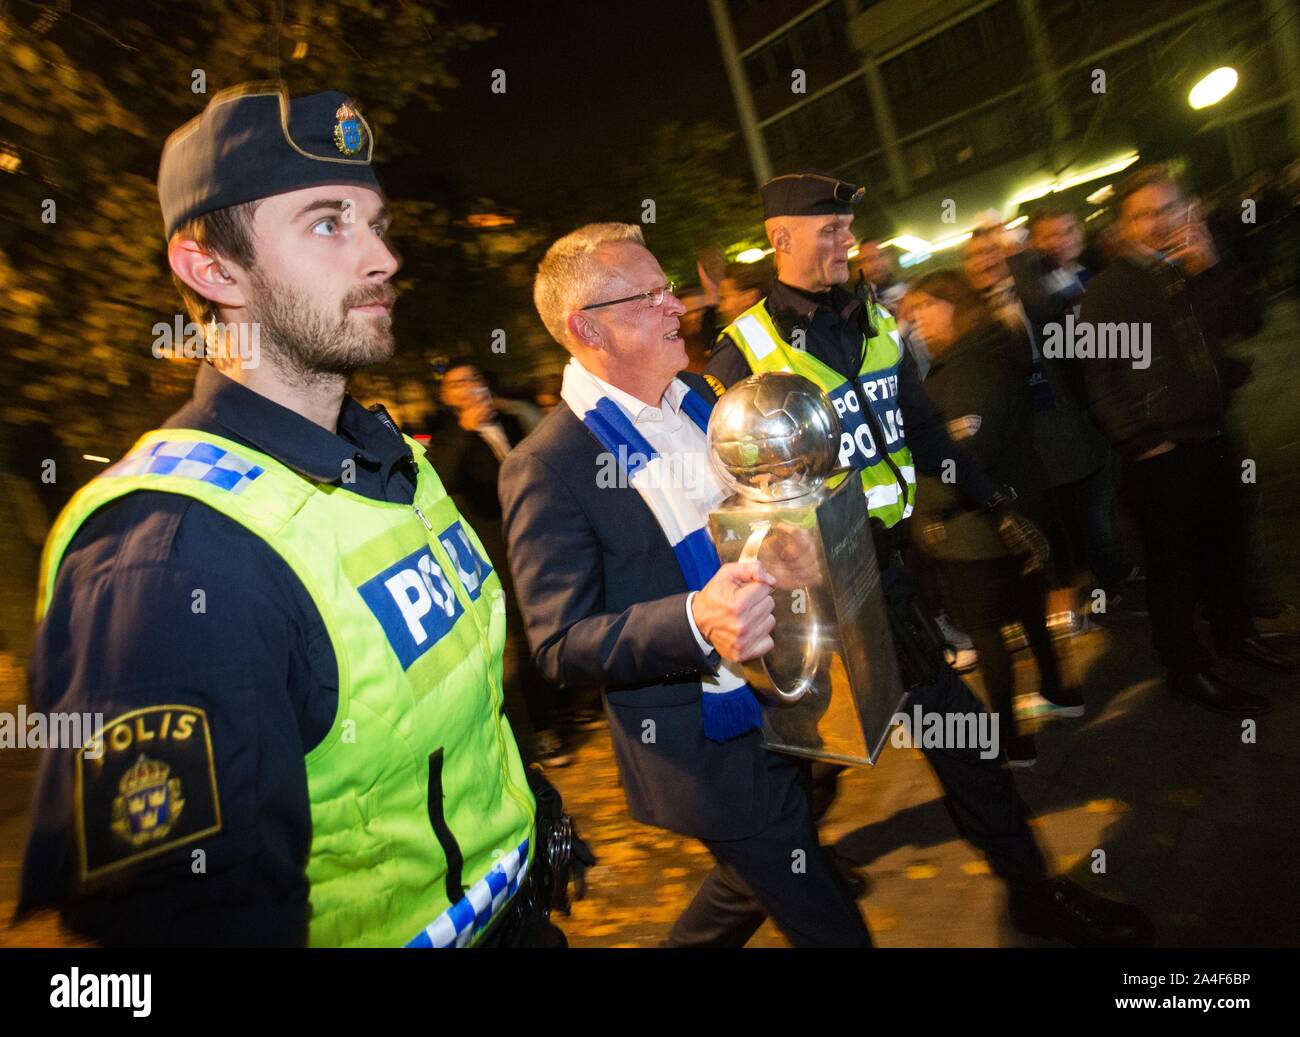 Over 20,000 fans on the German square in Norrköping celebrated the gold heroes of IFK Norrköping after the Swedish gold in football. Coach Janne Andersson with pokal. Photo Jeppe Gustafsson Stock Photo